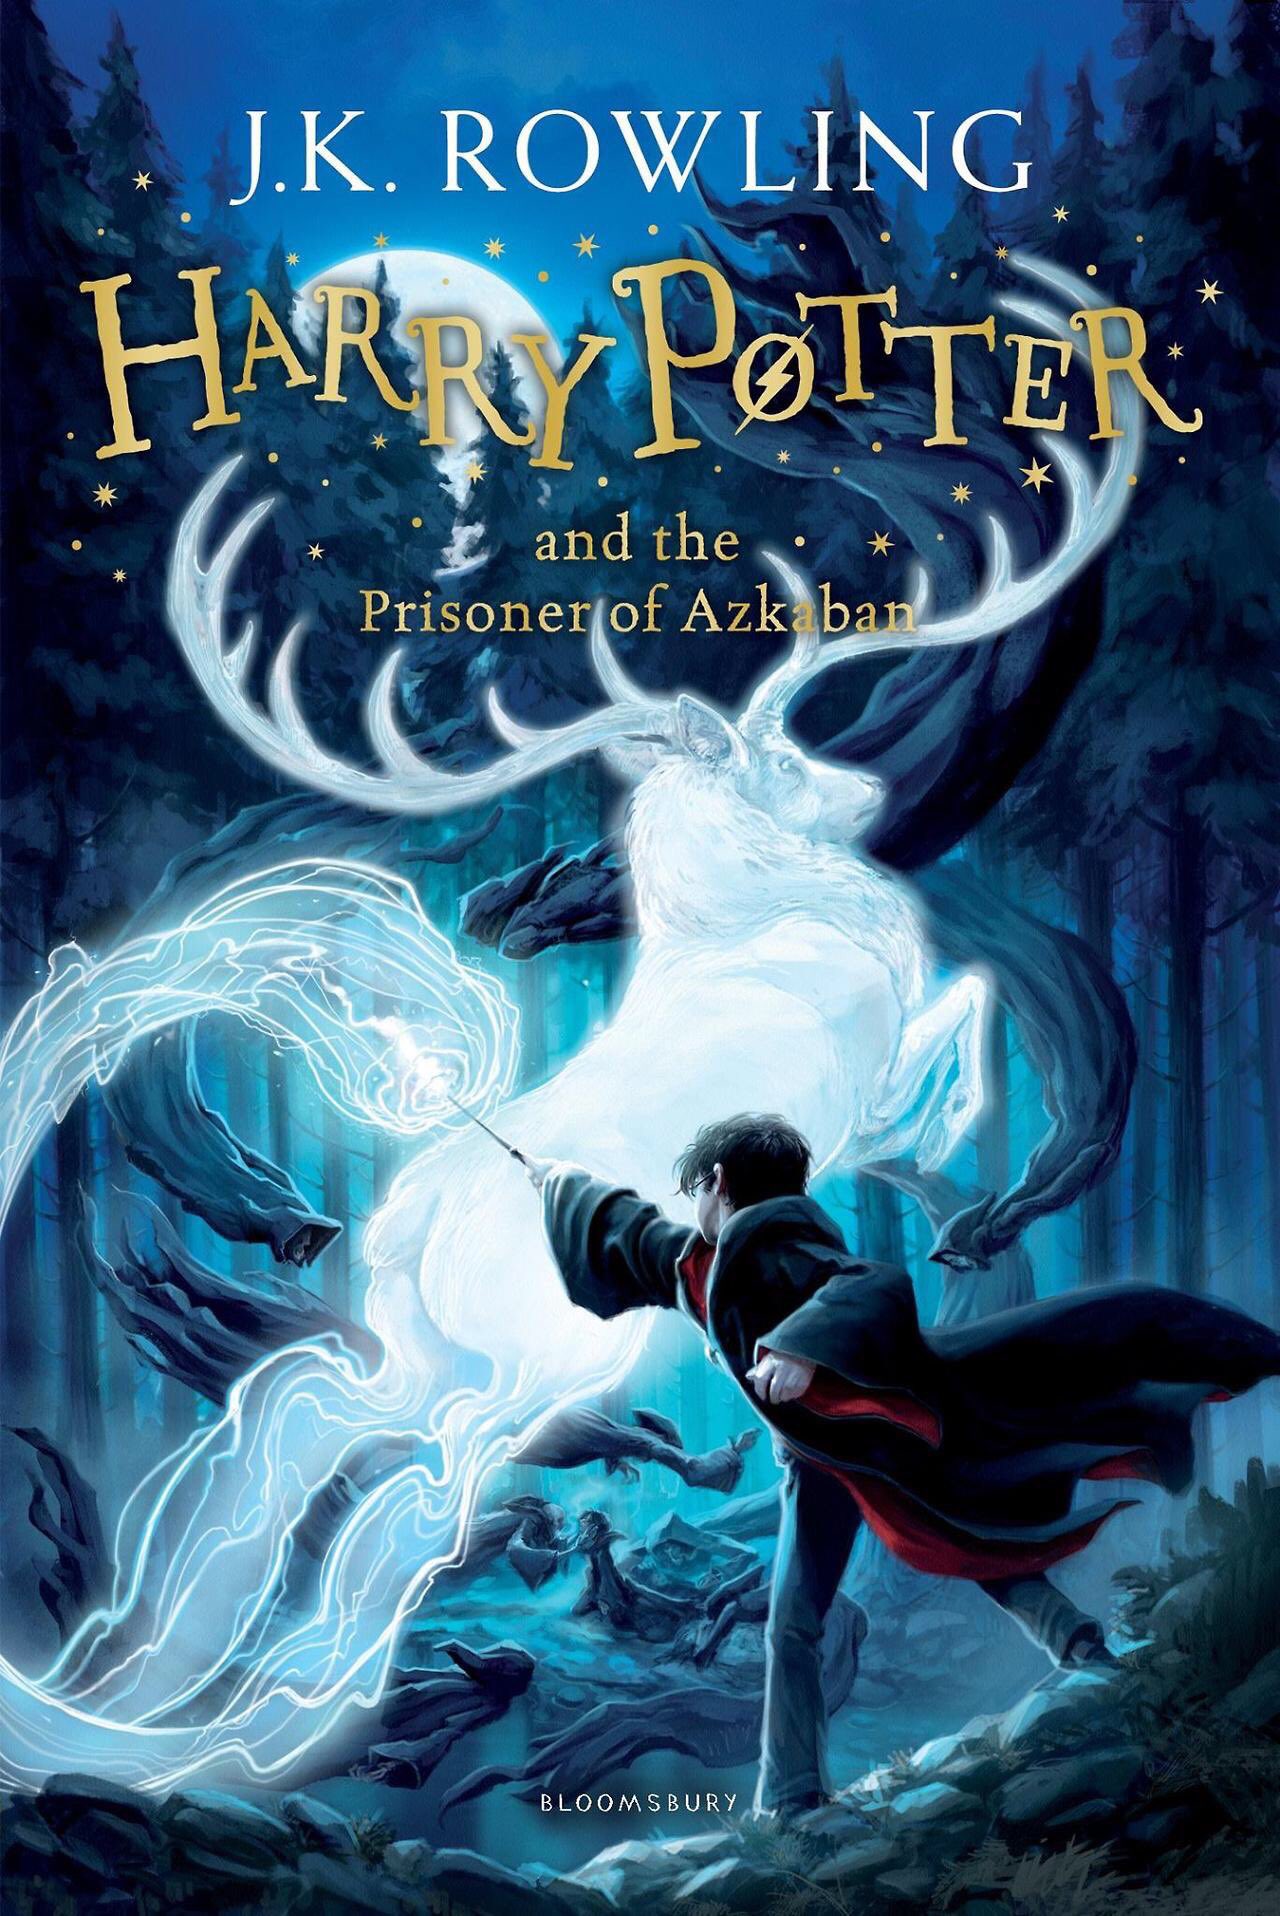 Happy 20th birthday to the greatest book of the harry potter series and basically of all time 